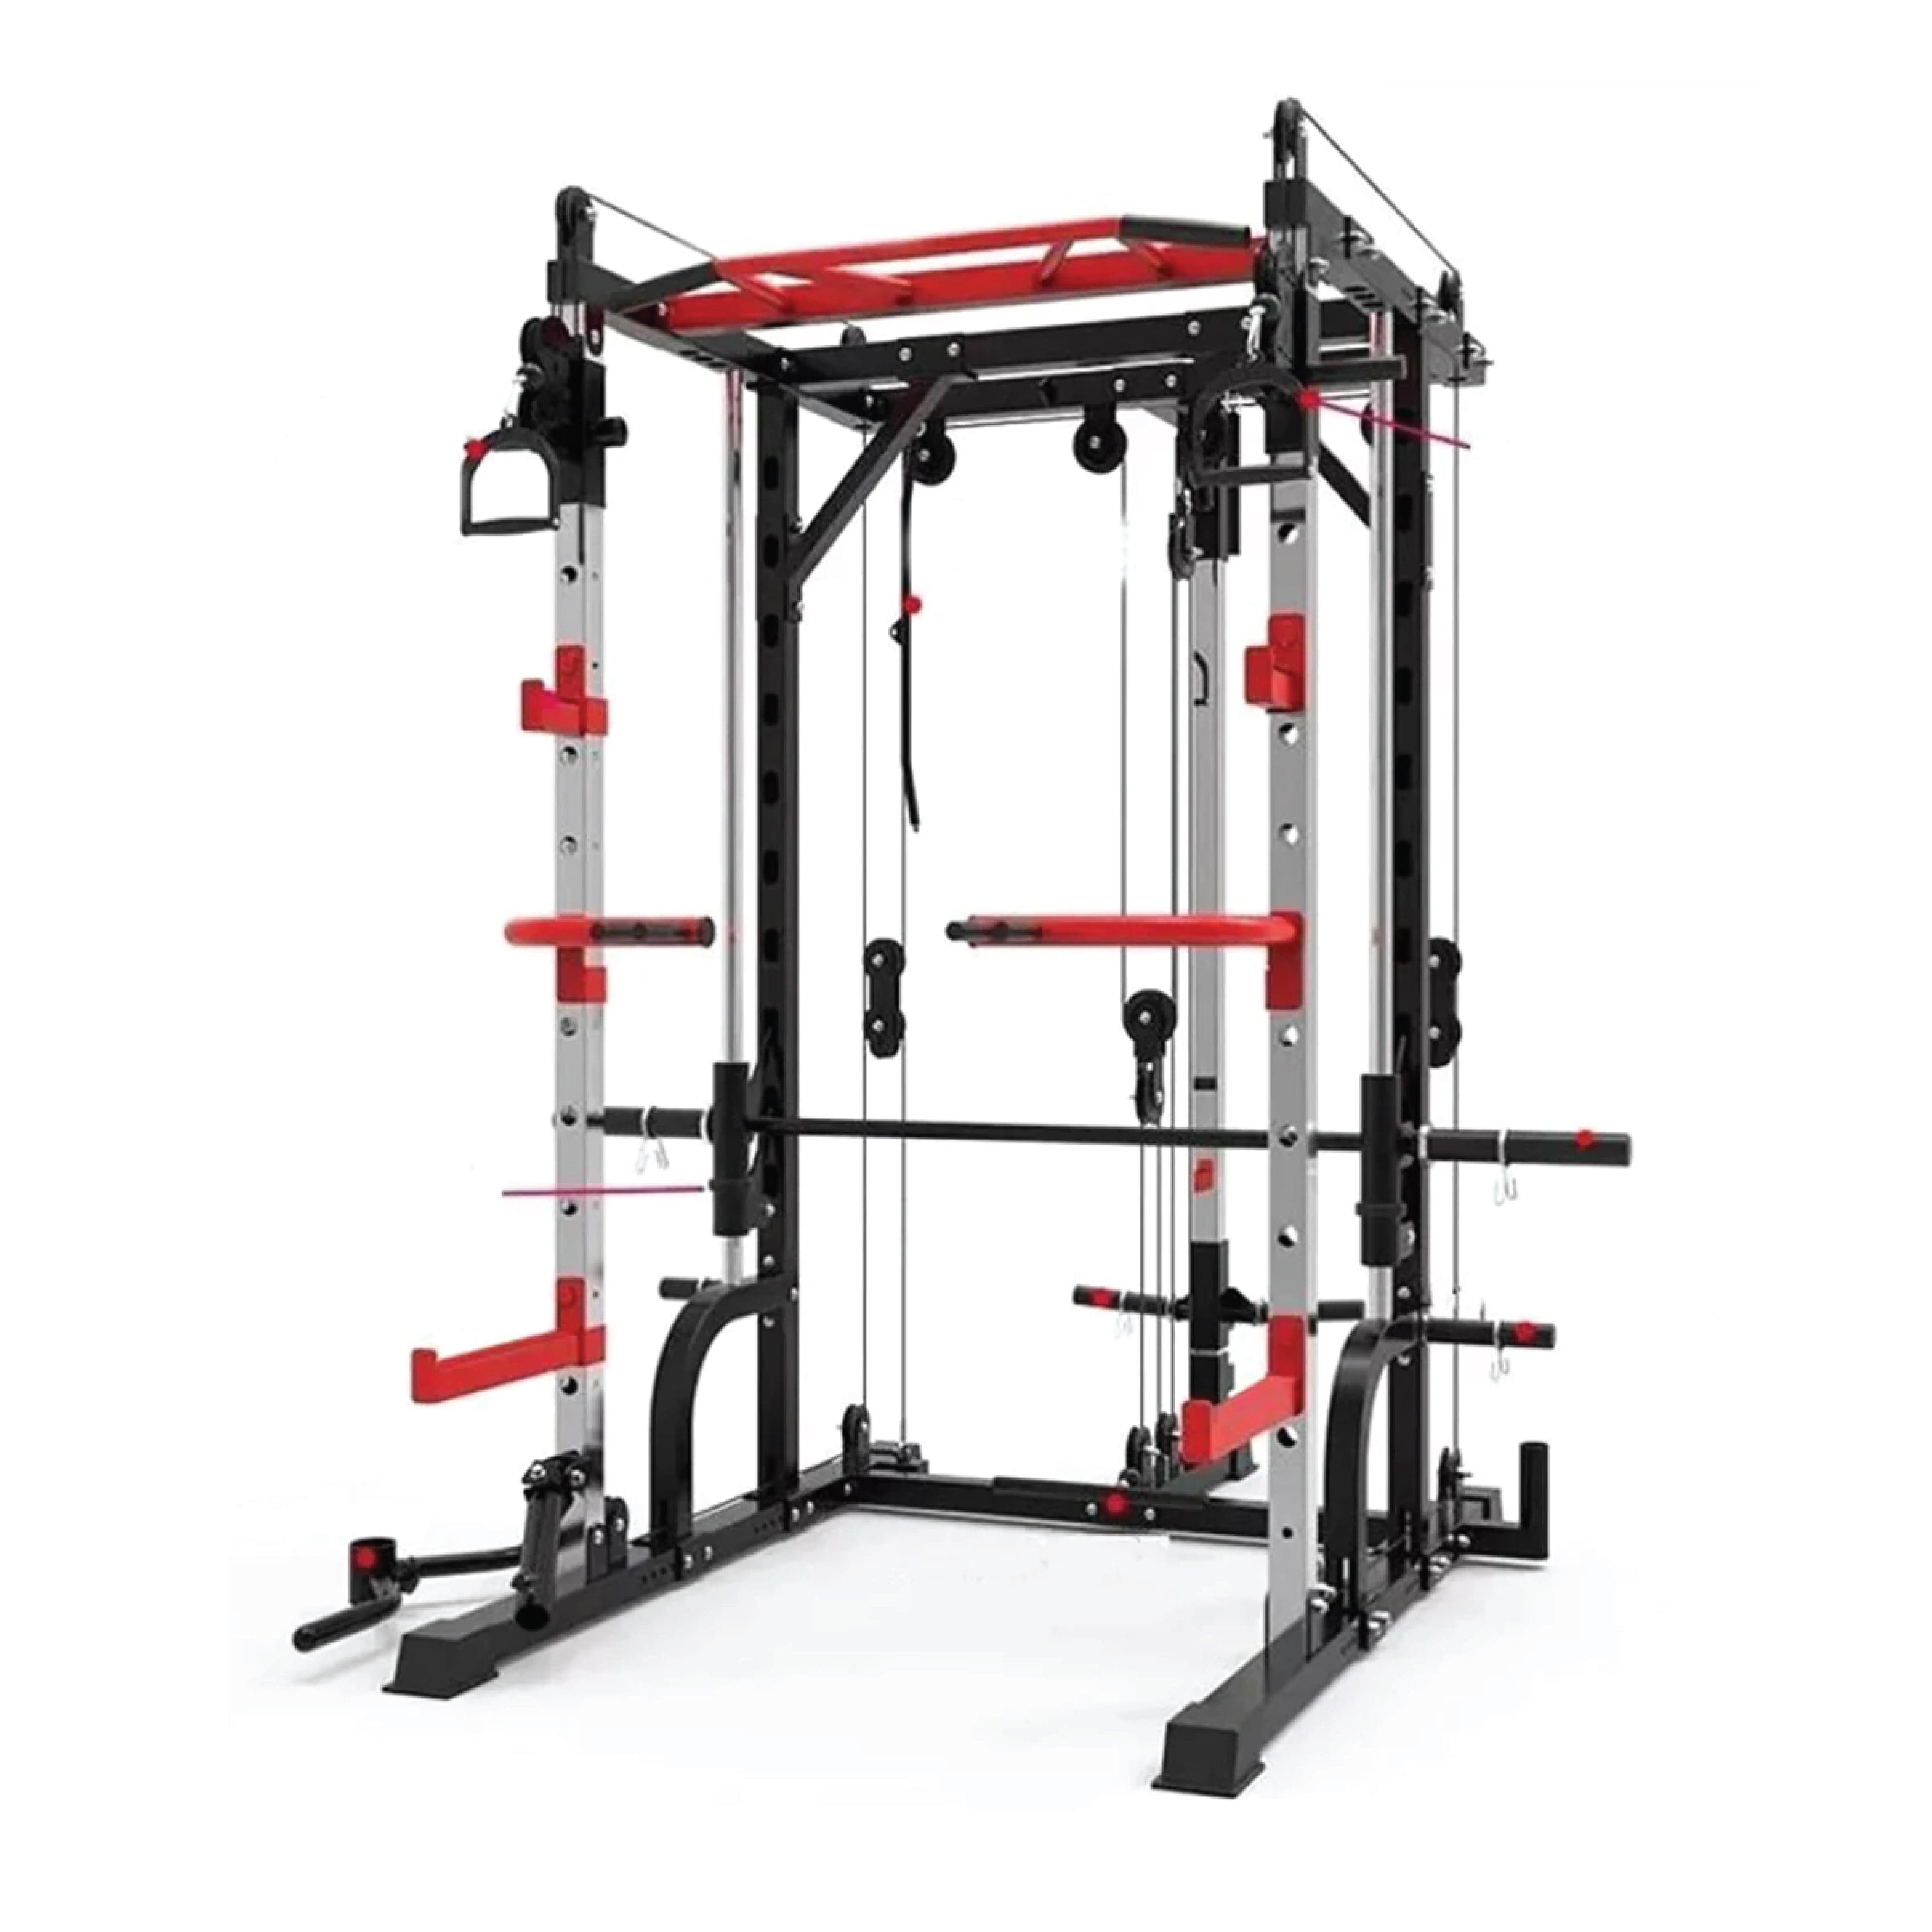 Combo Deal | 1441 Fitness Smith Machine With Functional Trainer J009 +